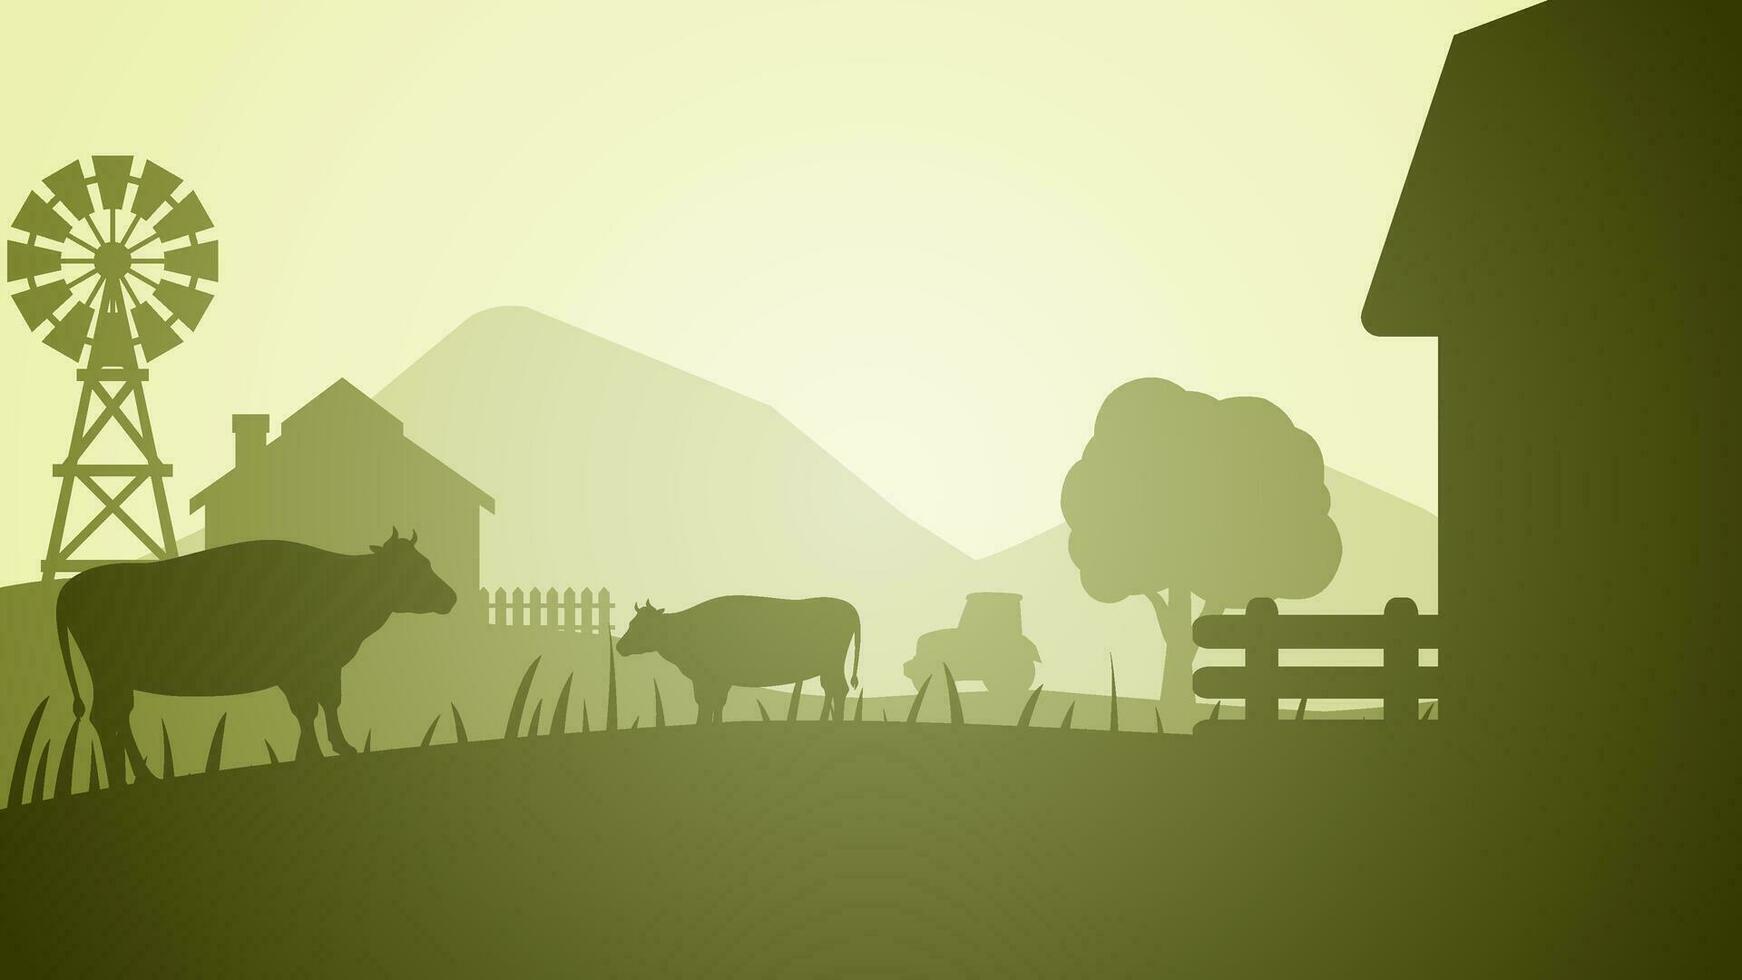 Farmland silhouette landscape vector illustration. Scenery of livestock and windmill in the countryside farm. Rural panorama for illustration, background or wallpaper